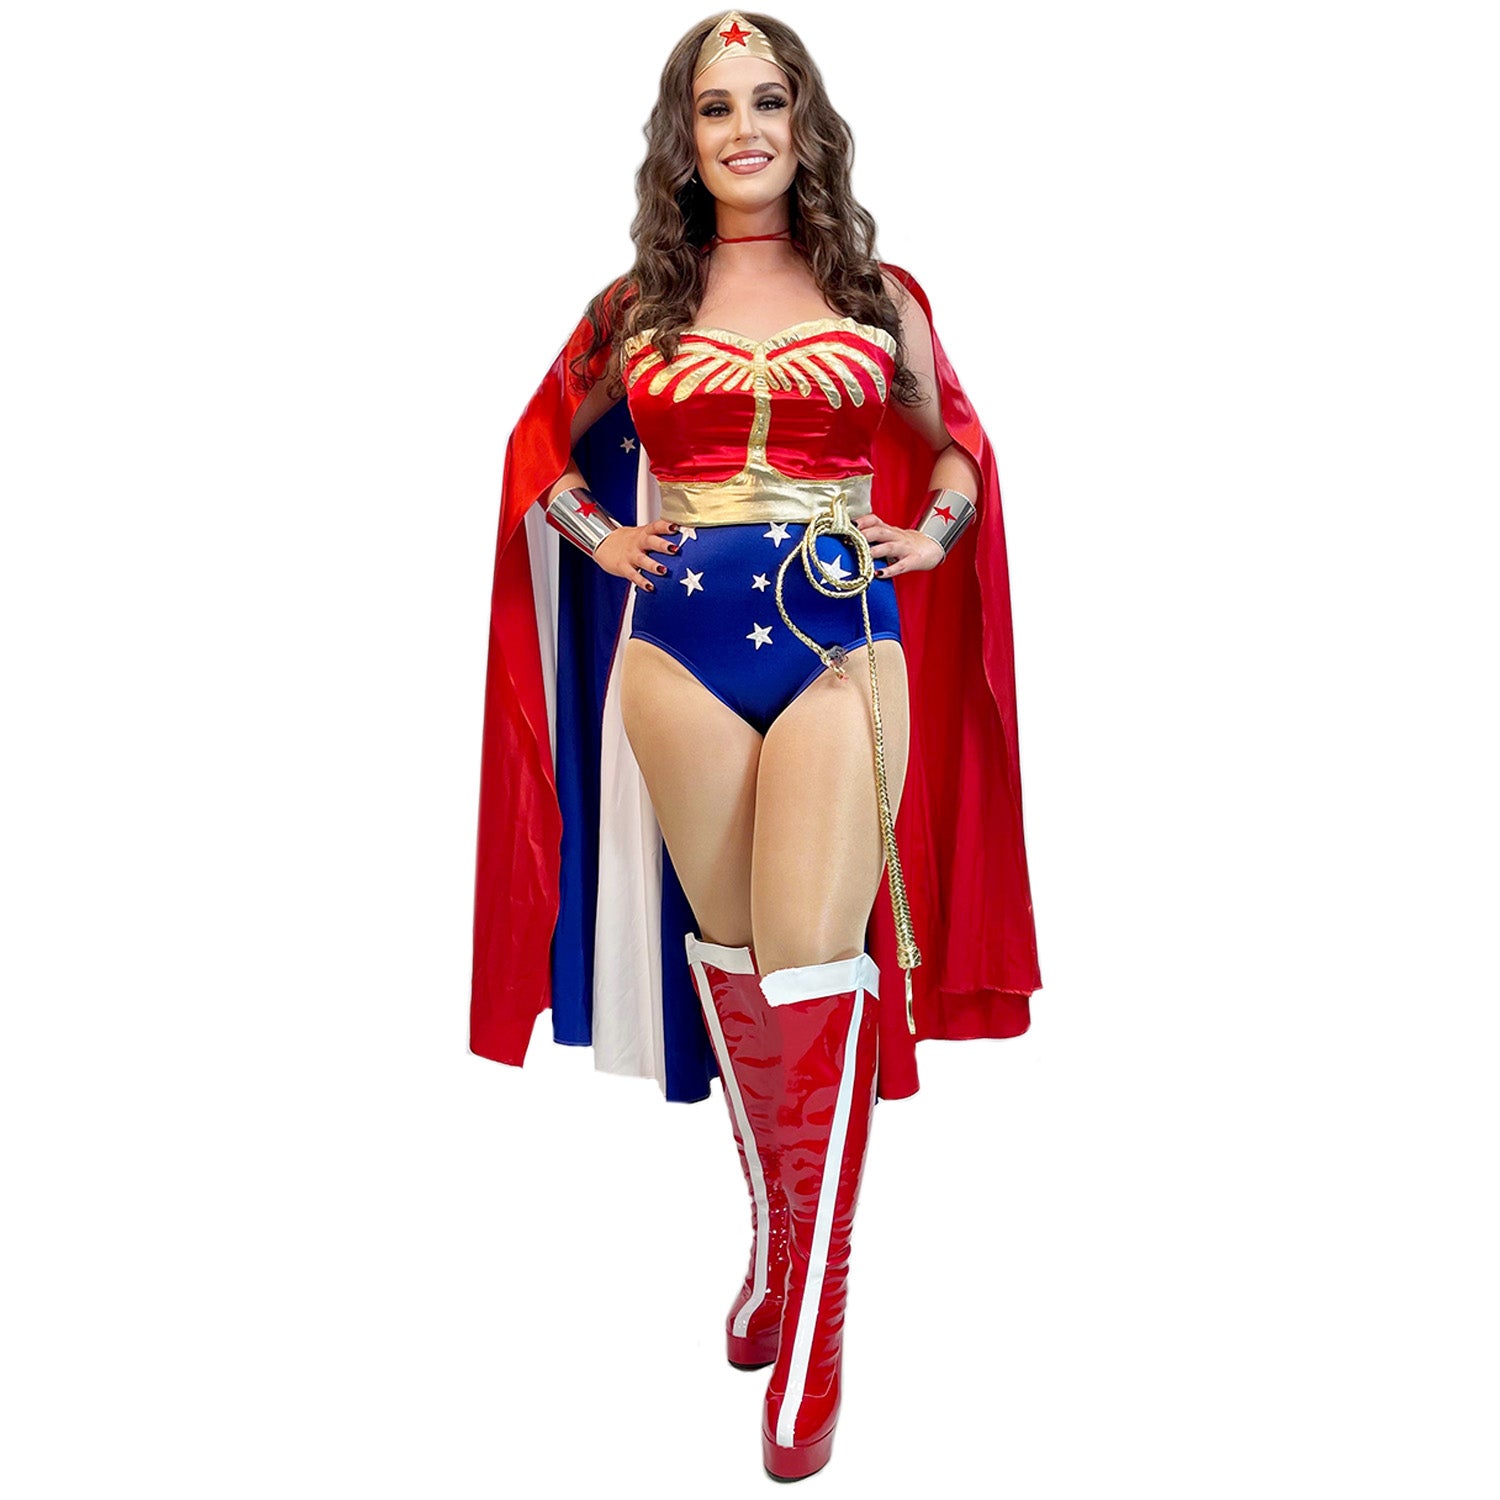 Wonder Woman Inspired Adult Costume w/ Cape, Gold Crown, Lasso, and Cuffs